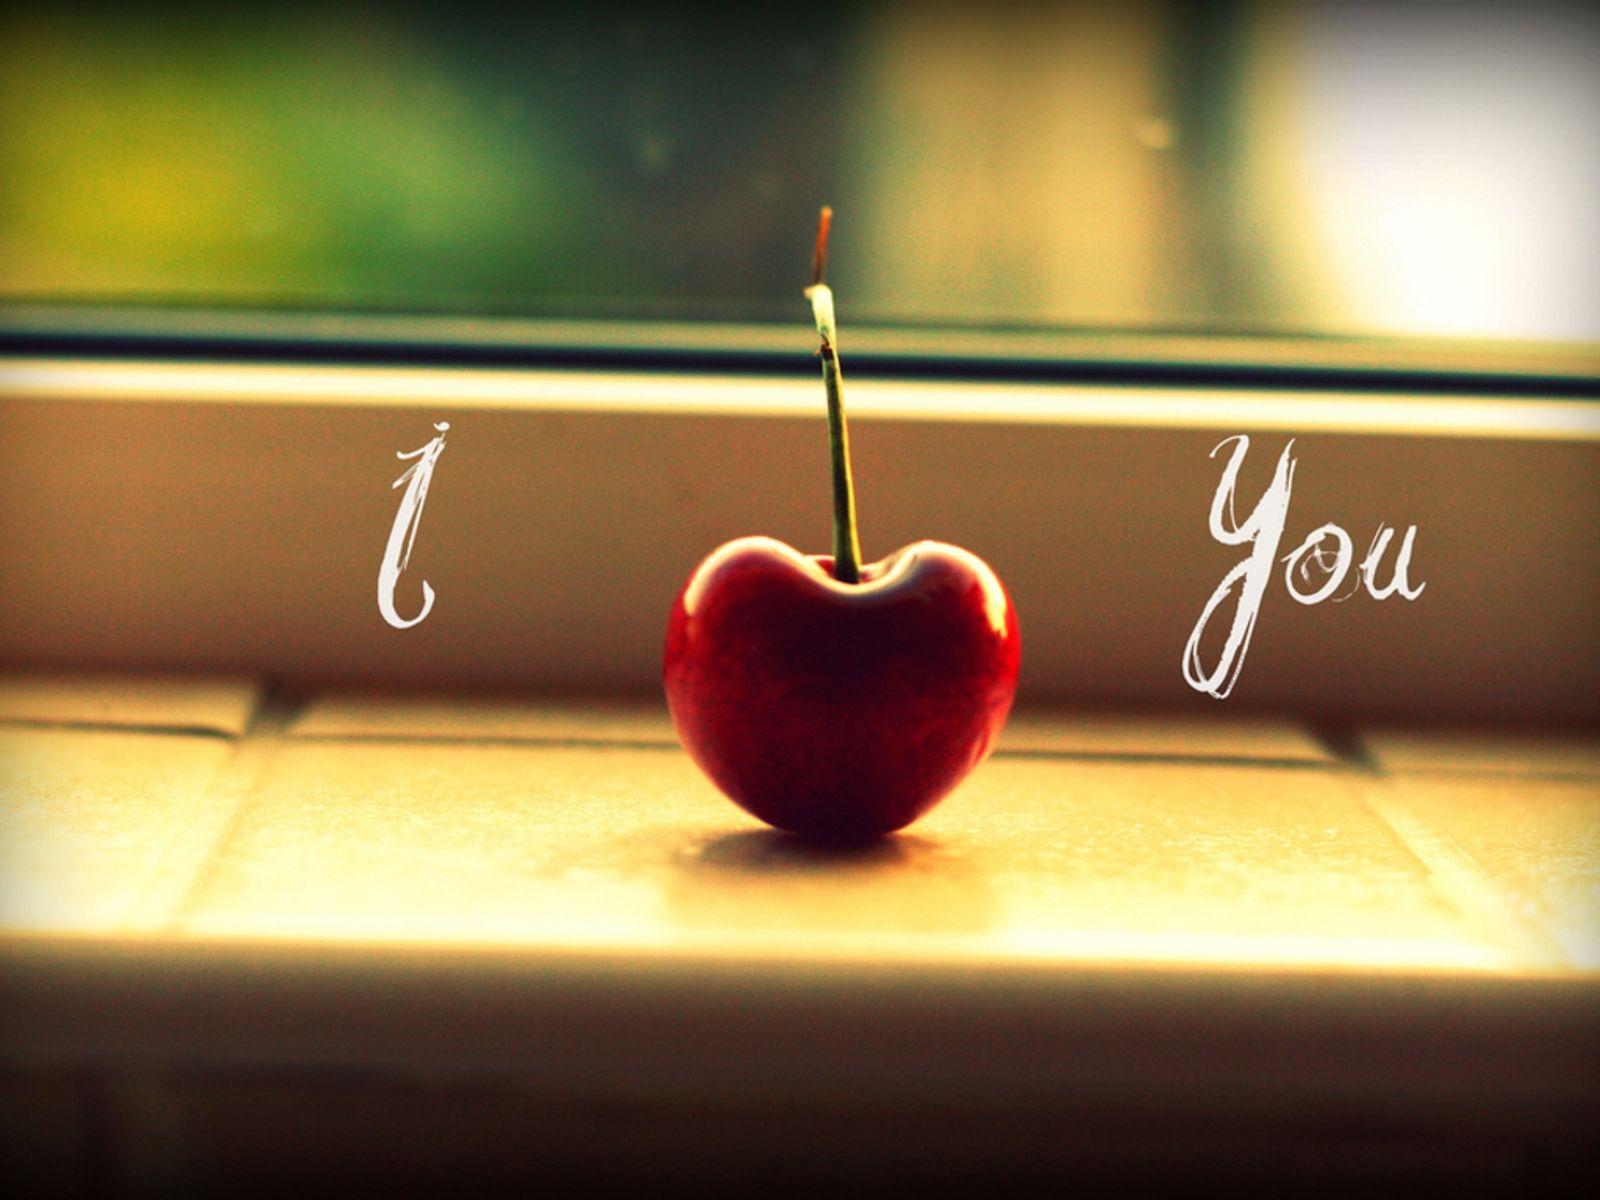 I Love You HD Image Wallpaper. I Love You Free Download Image